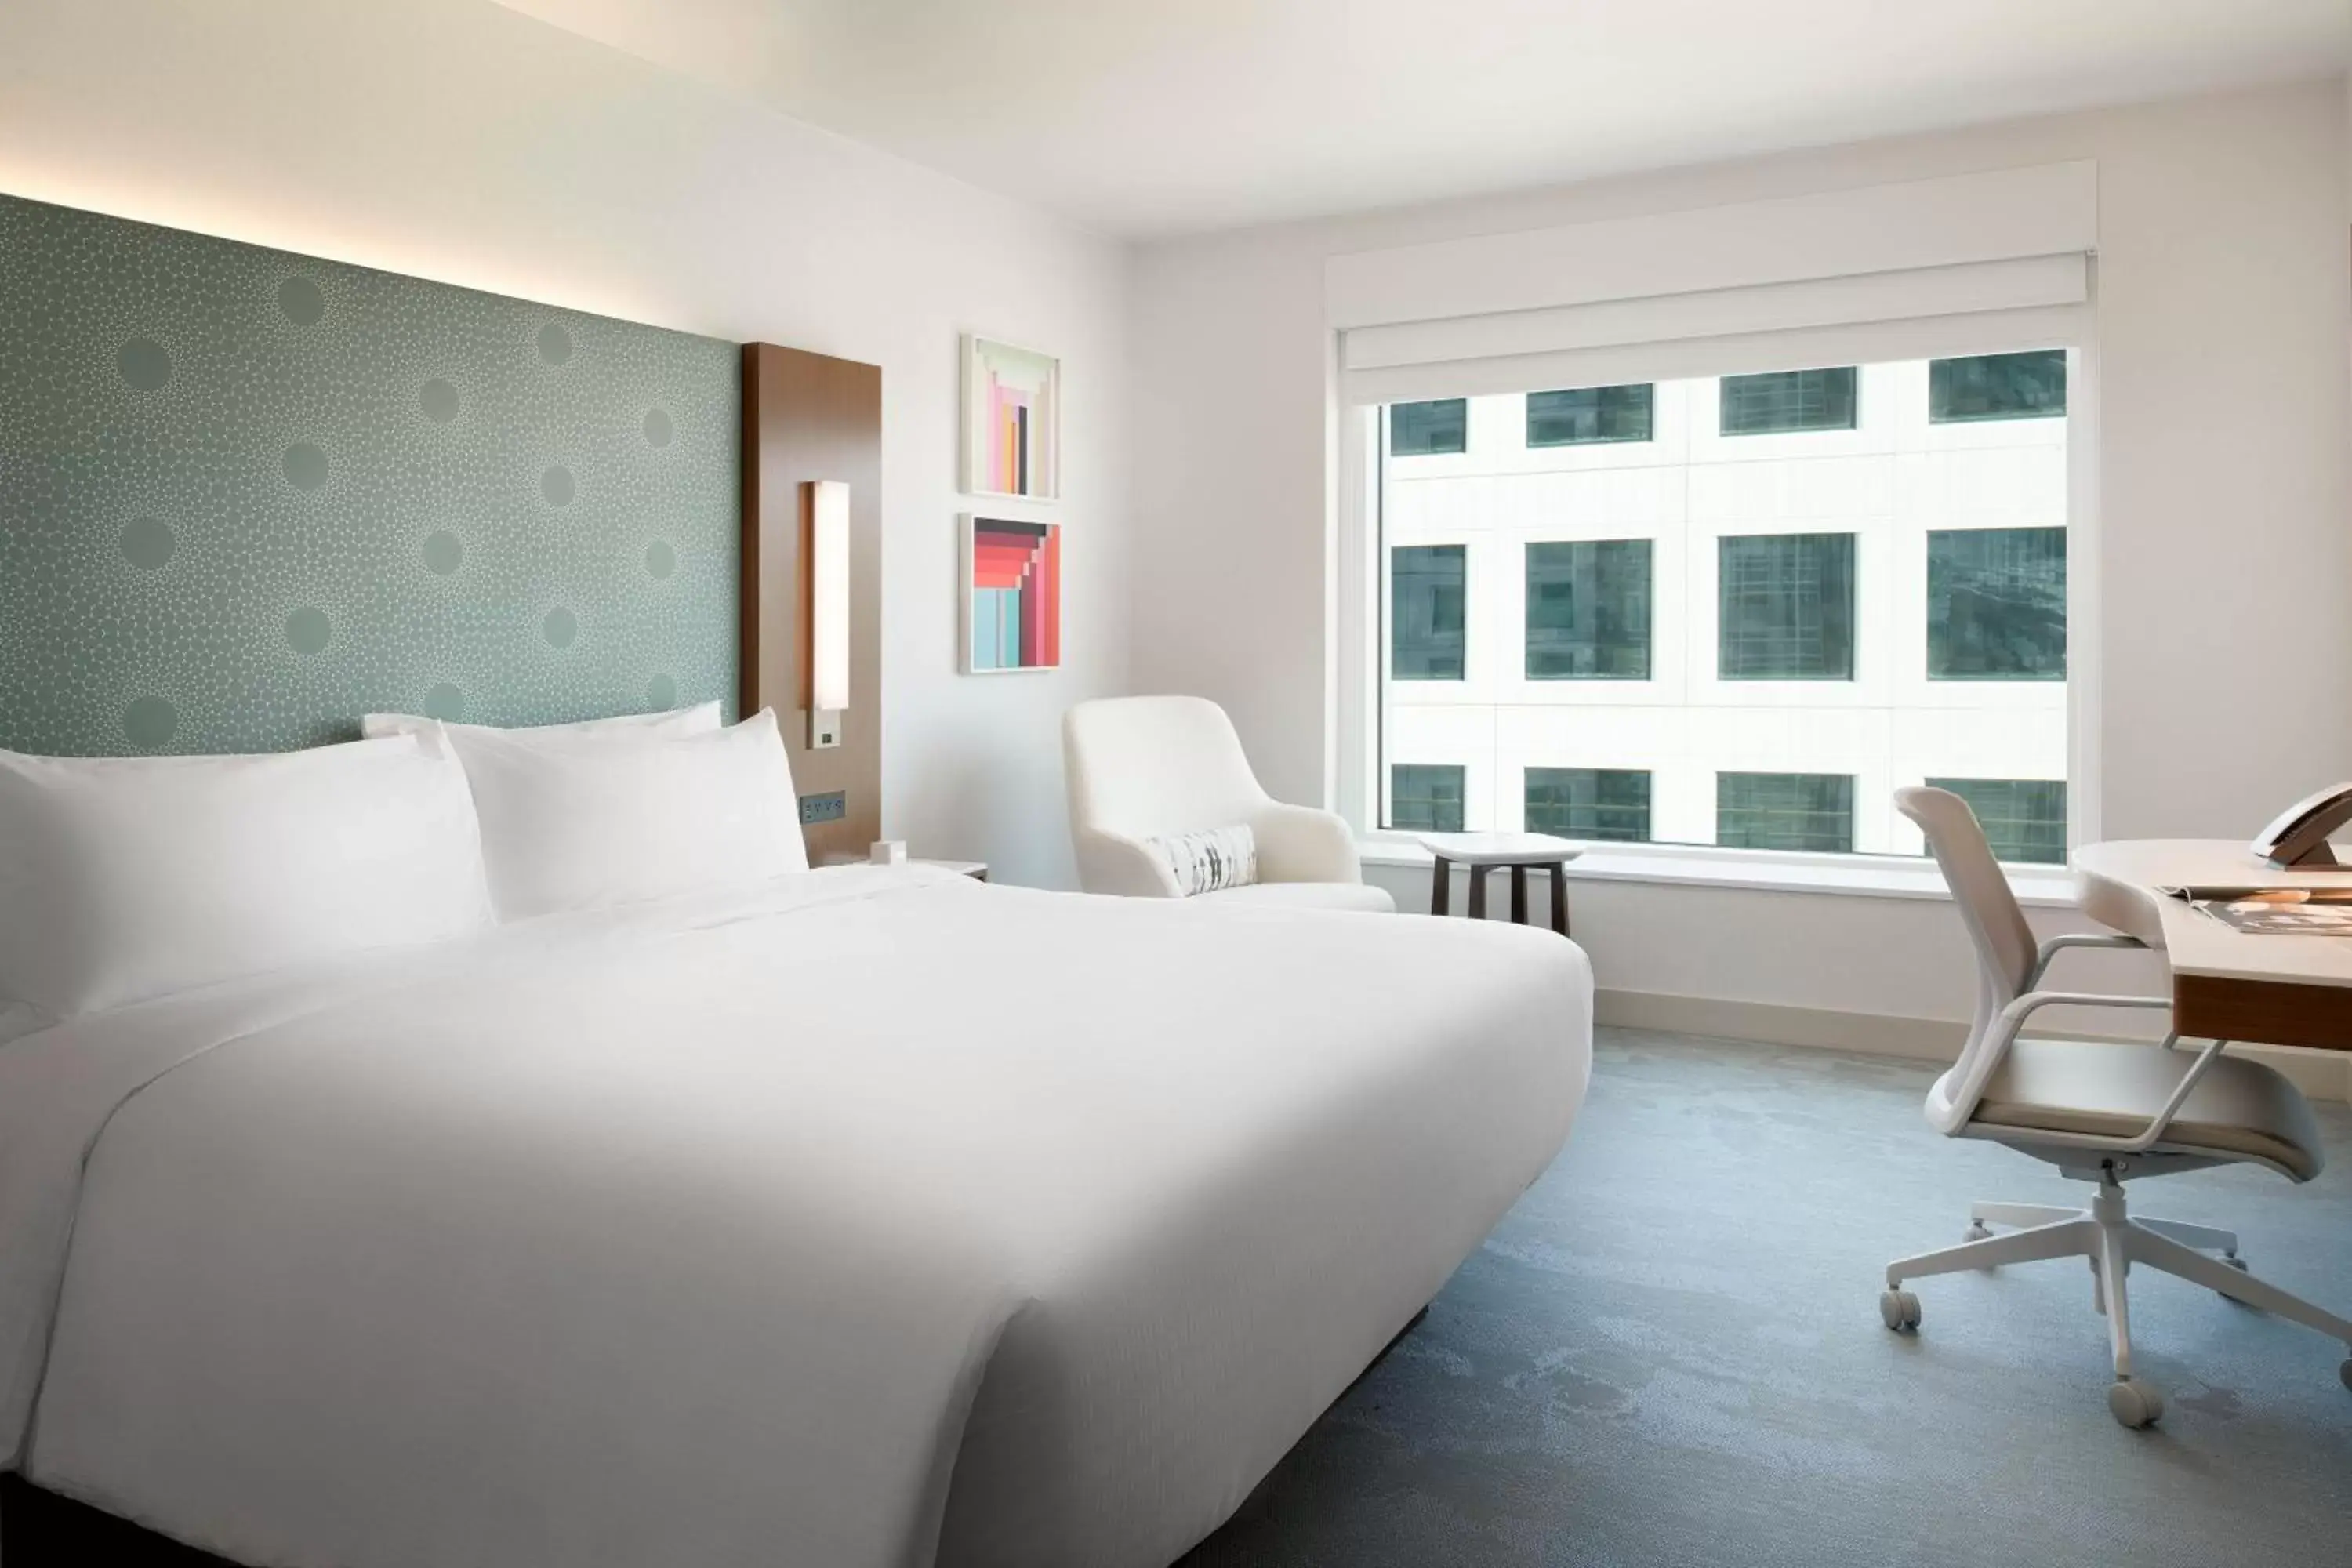 Deluxe King Room in LUMA Hotel San Francisco - #1 Hottest New Hotel in the US